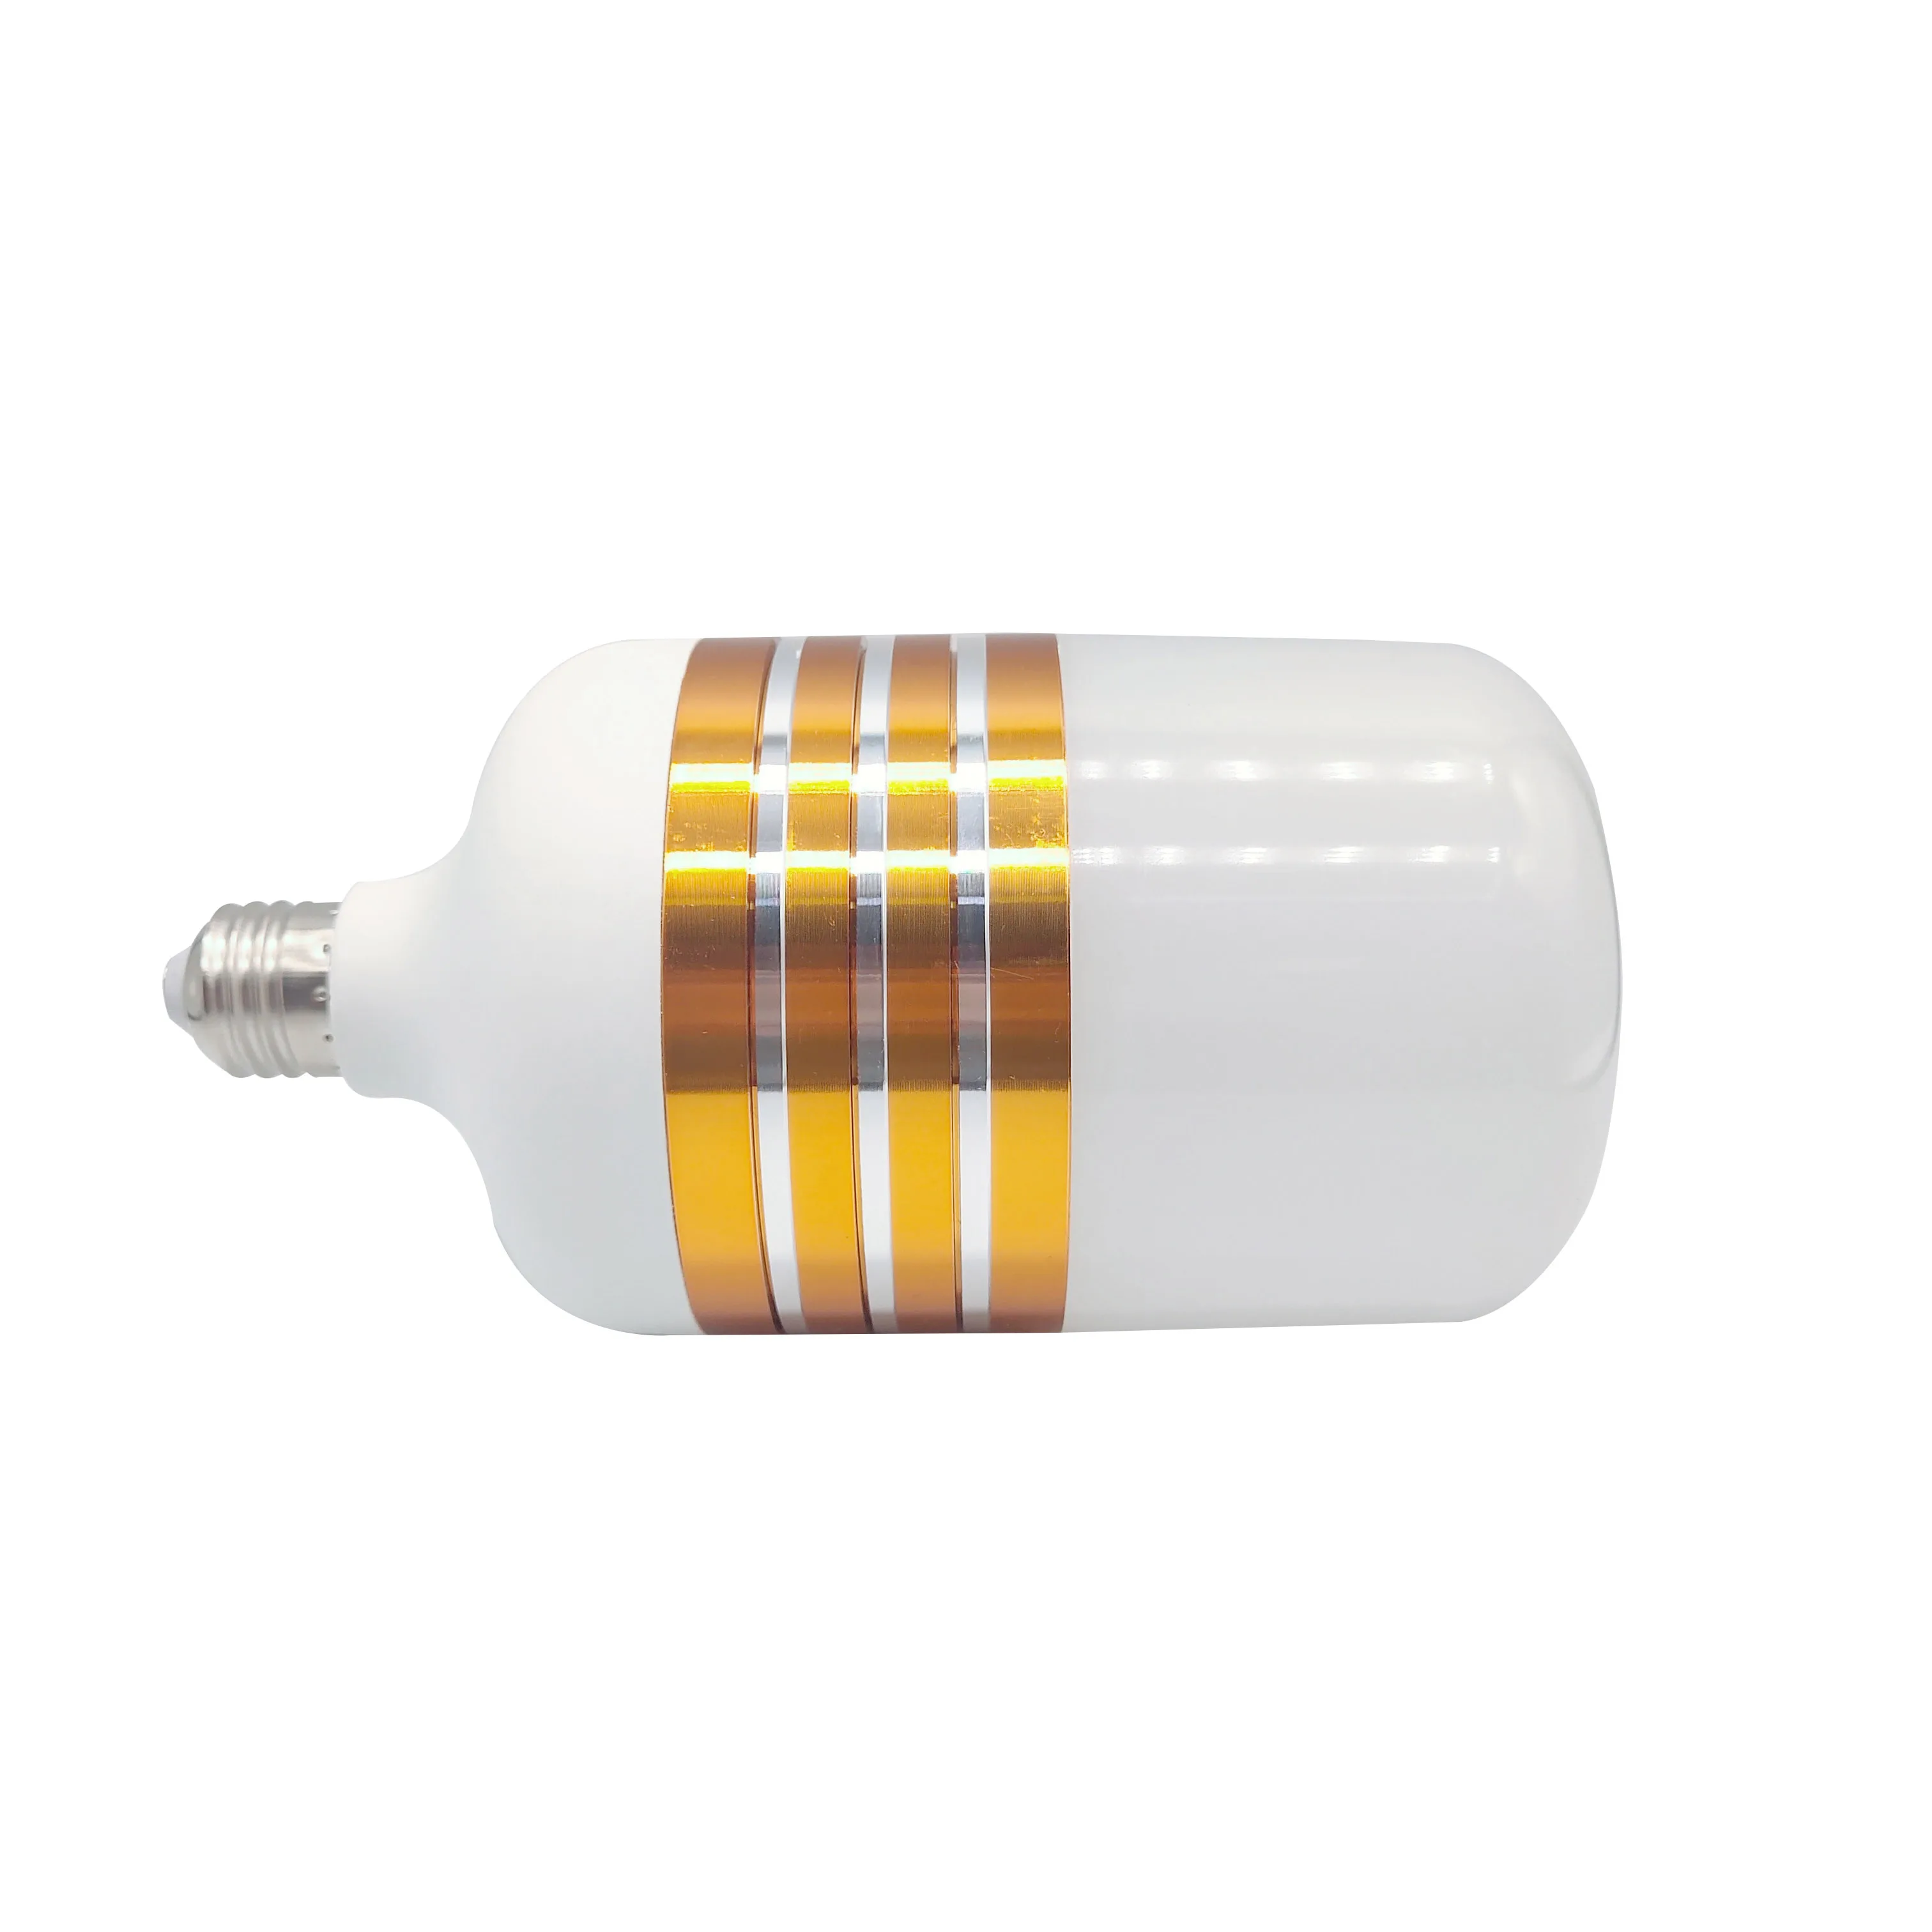 High Power  E27 38W LED T Bulb Led Lamps Bombilla Led screw in bulb Led light spare parts led home lighting Indoor Outdoor